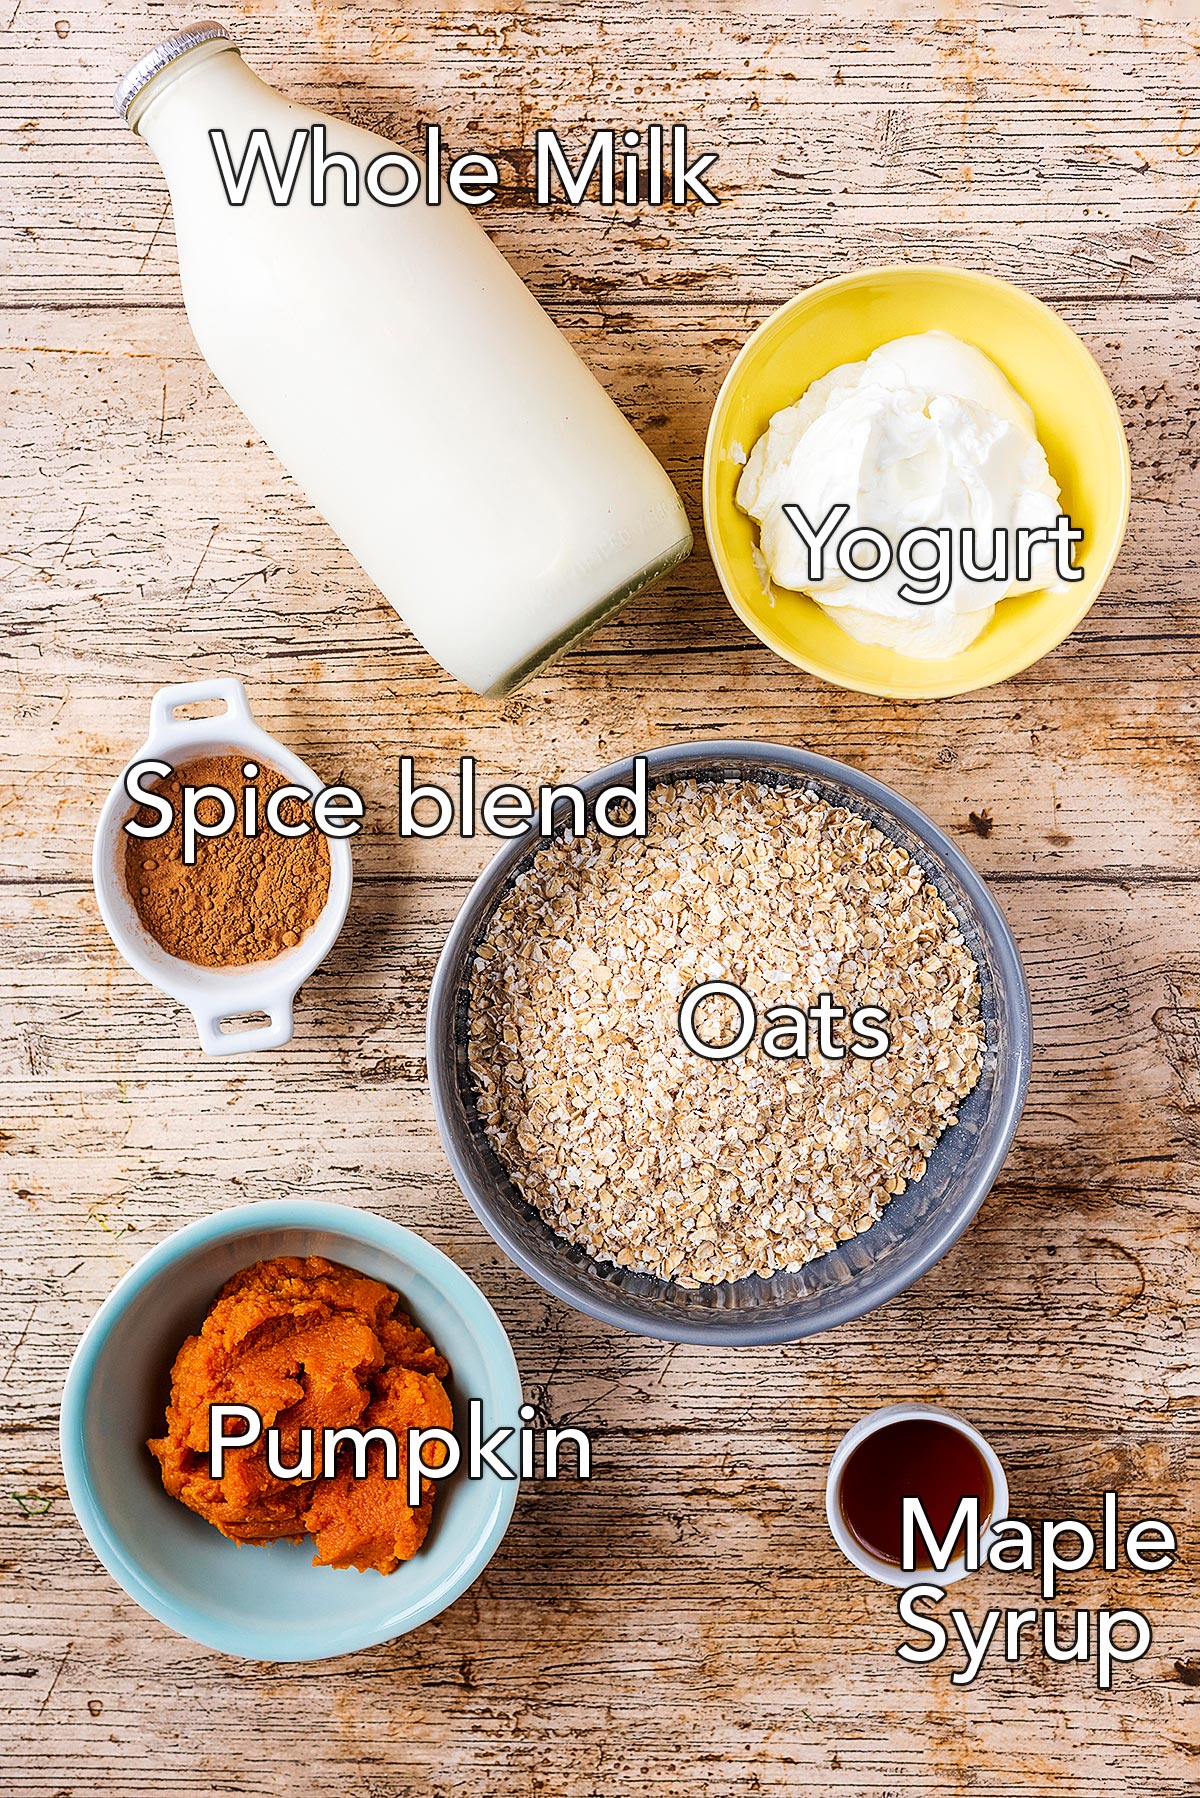 A bottle of milk with bowls of yogurt, oats, spices, pumpkin and maple syrup.